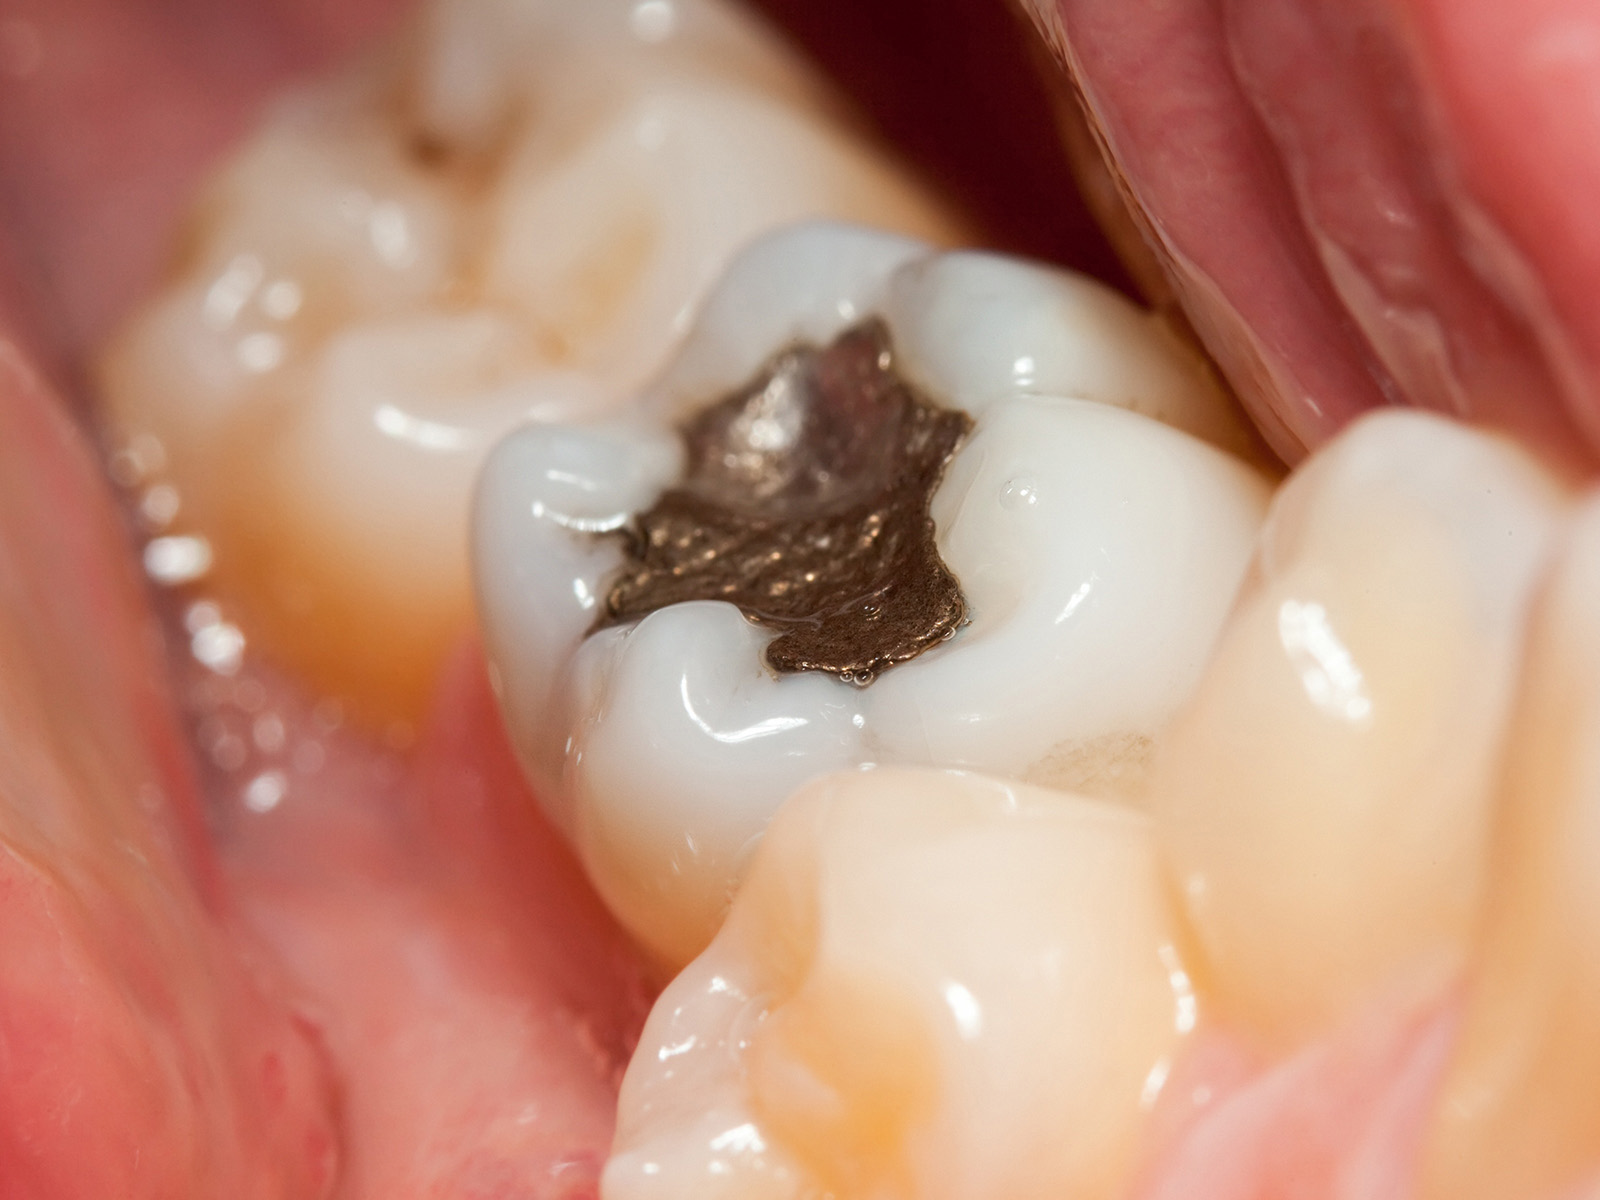 What Are Tooth-Colored Fillings?